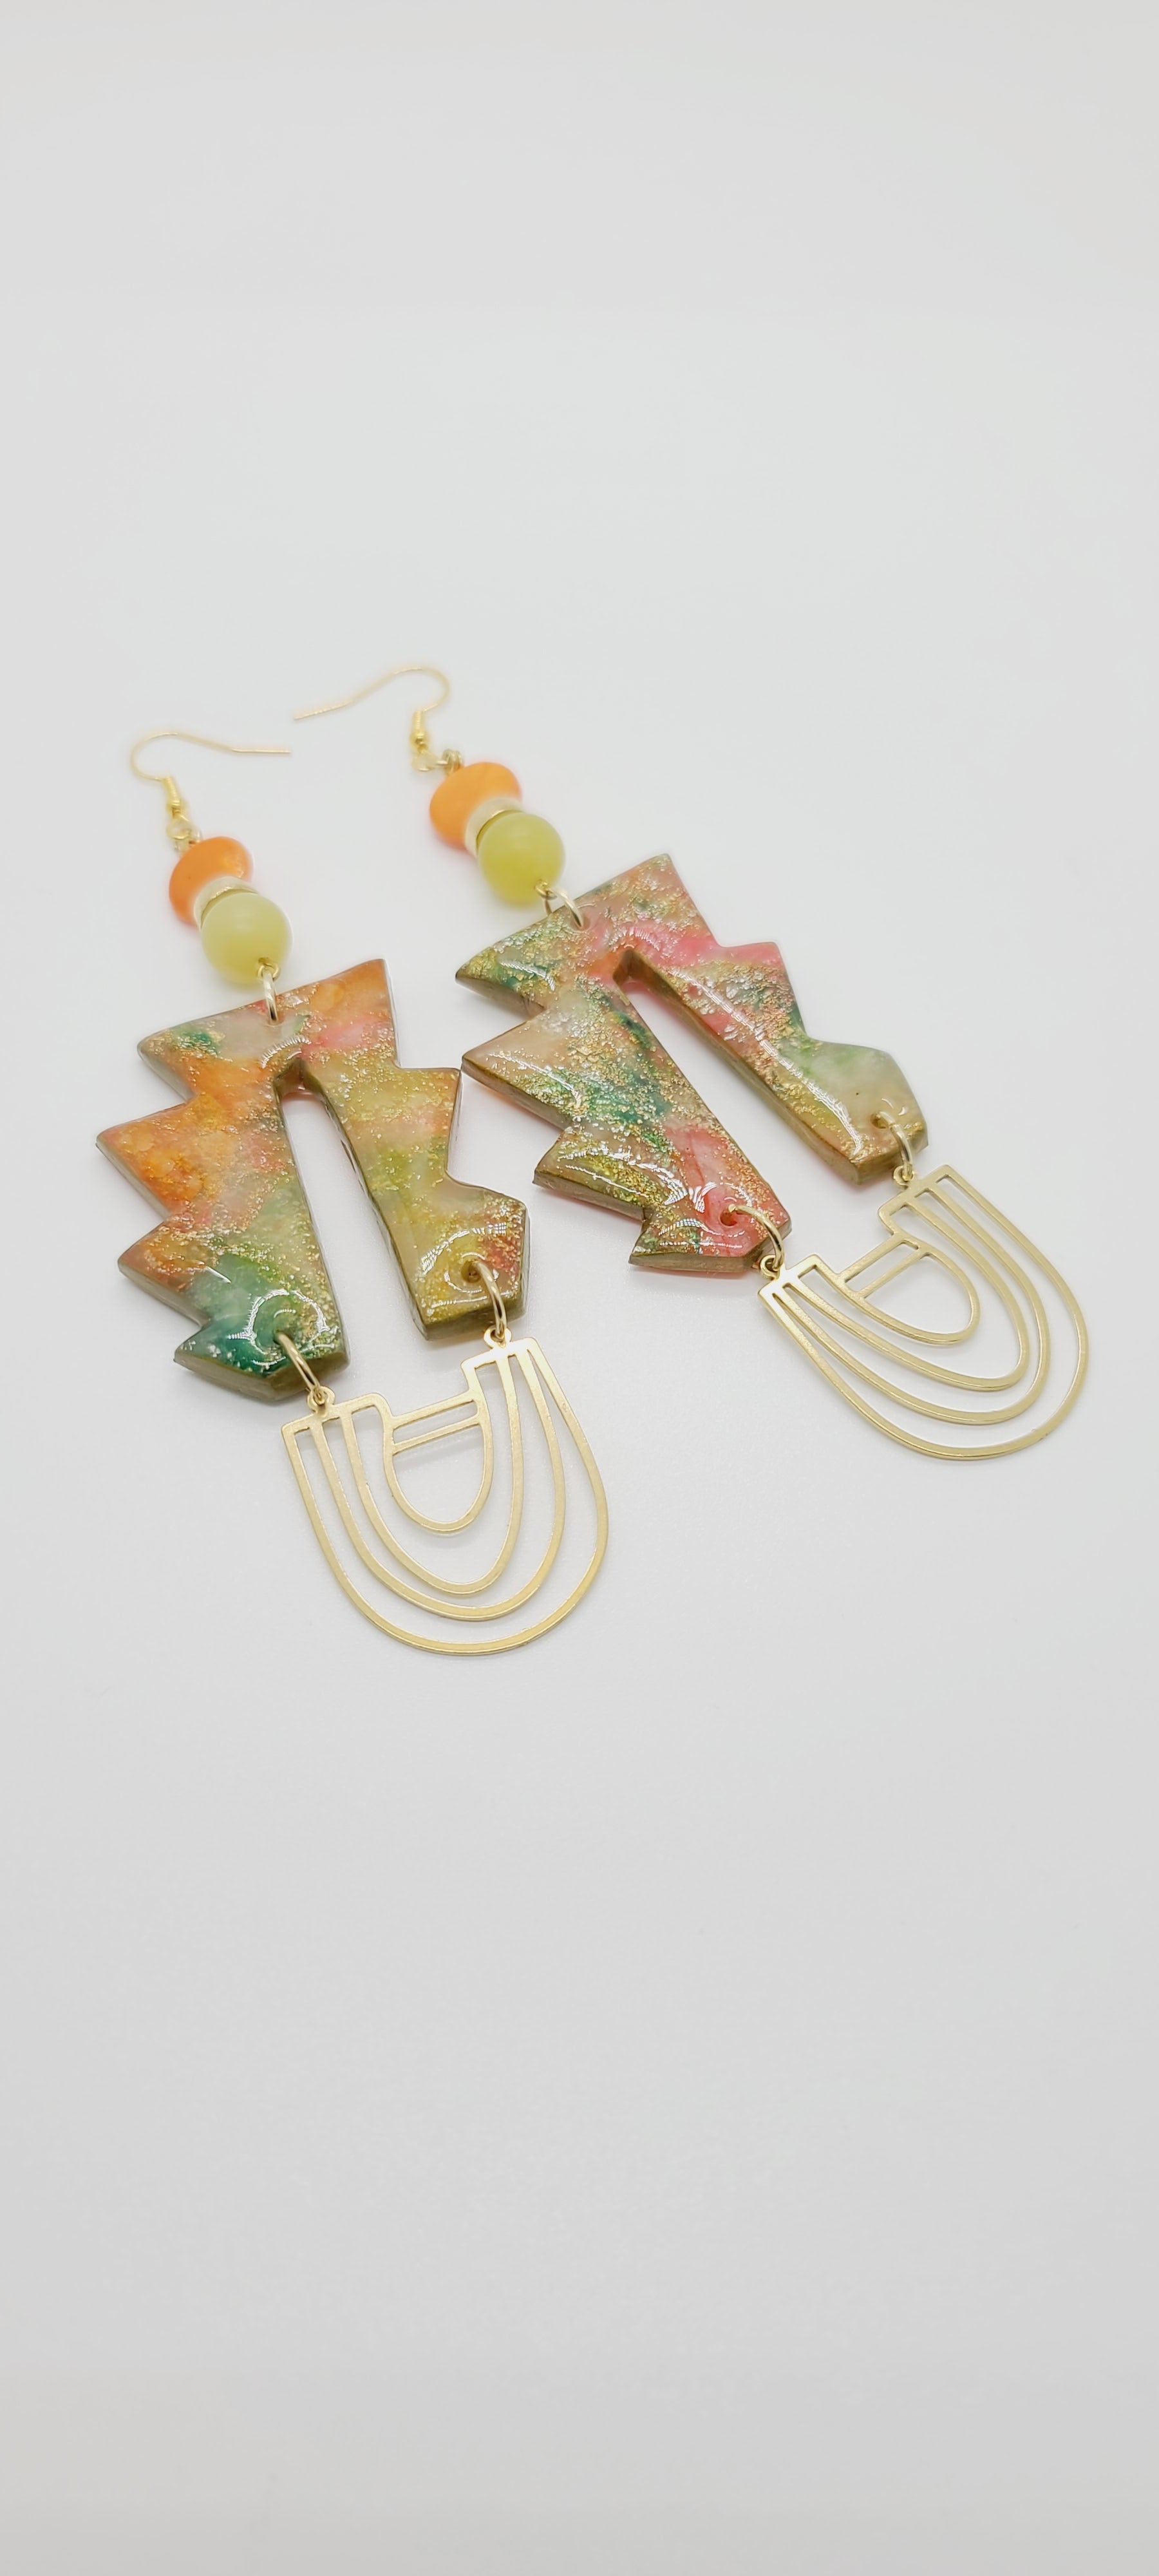 Length: 5 inches | Weight: 0.9 ounces  Distinctly You! These earrings are made with geometric-shape polymer clay in orange green gold with gold flake, U-shape gold charms,10mm frosted green glass beads, 8mm orange glass discs, and gold rondelles.